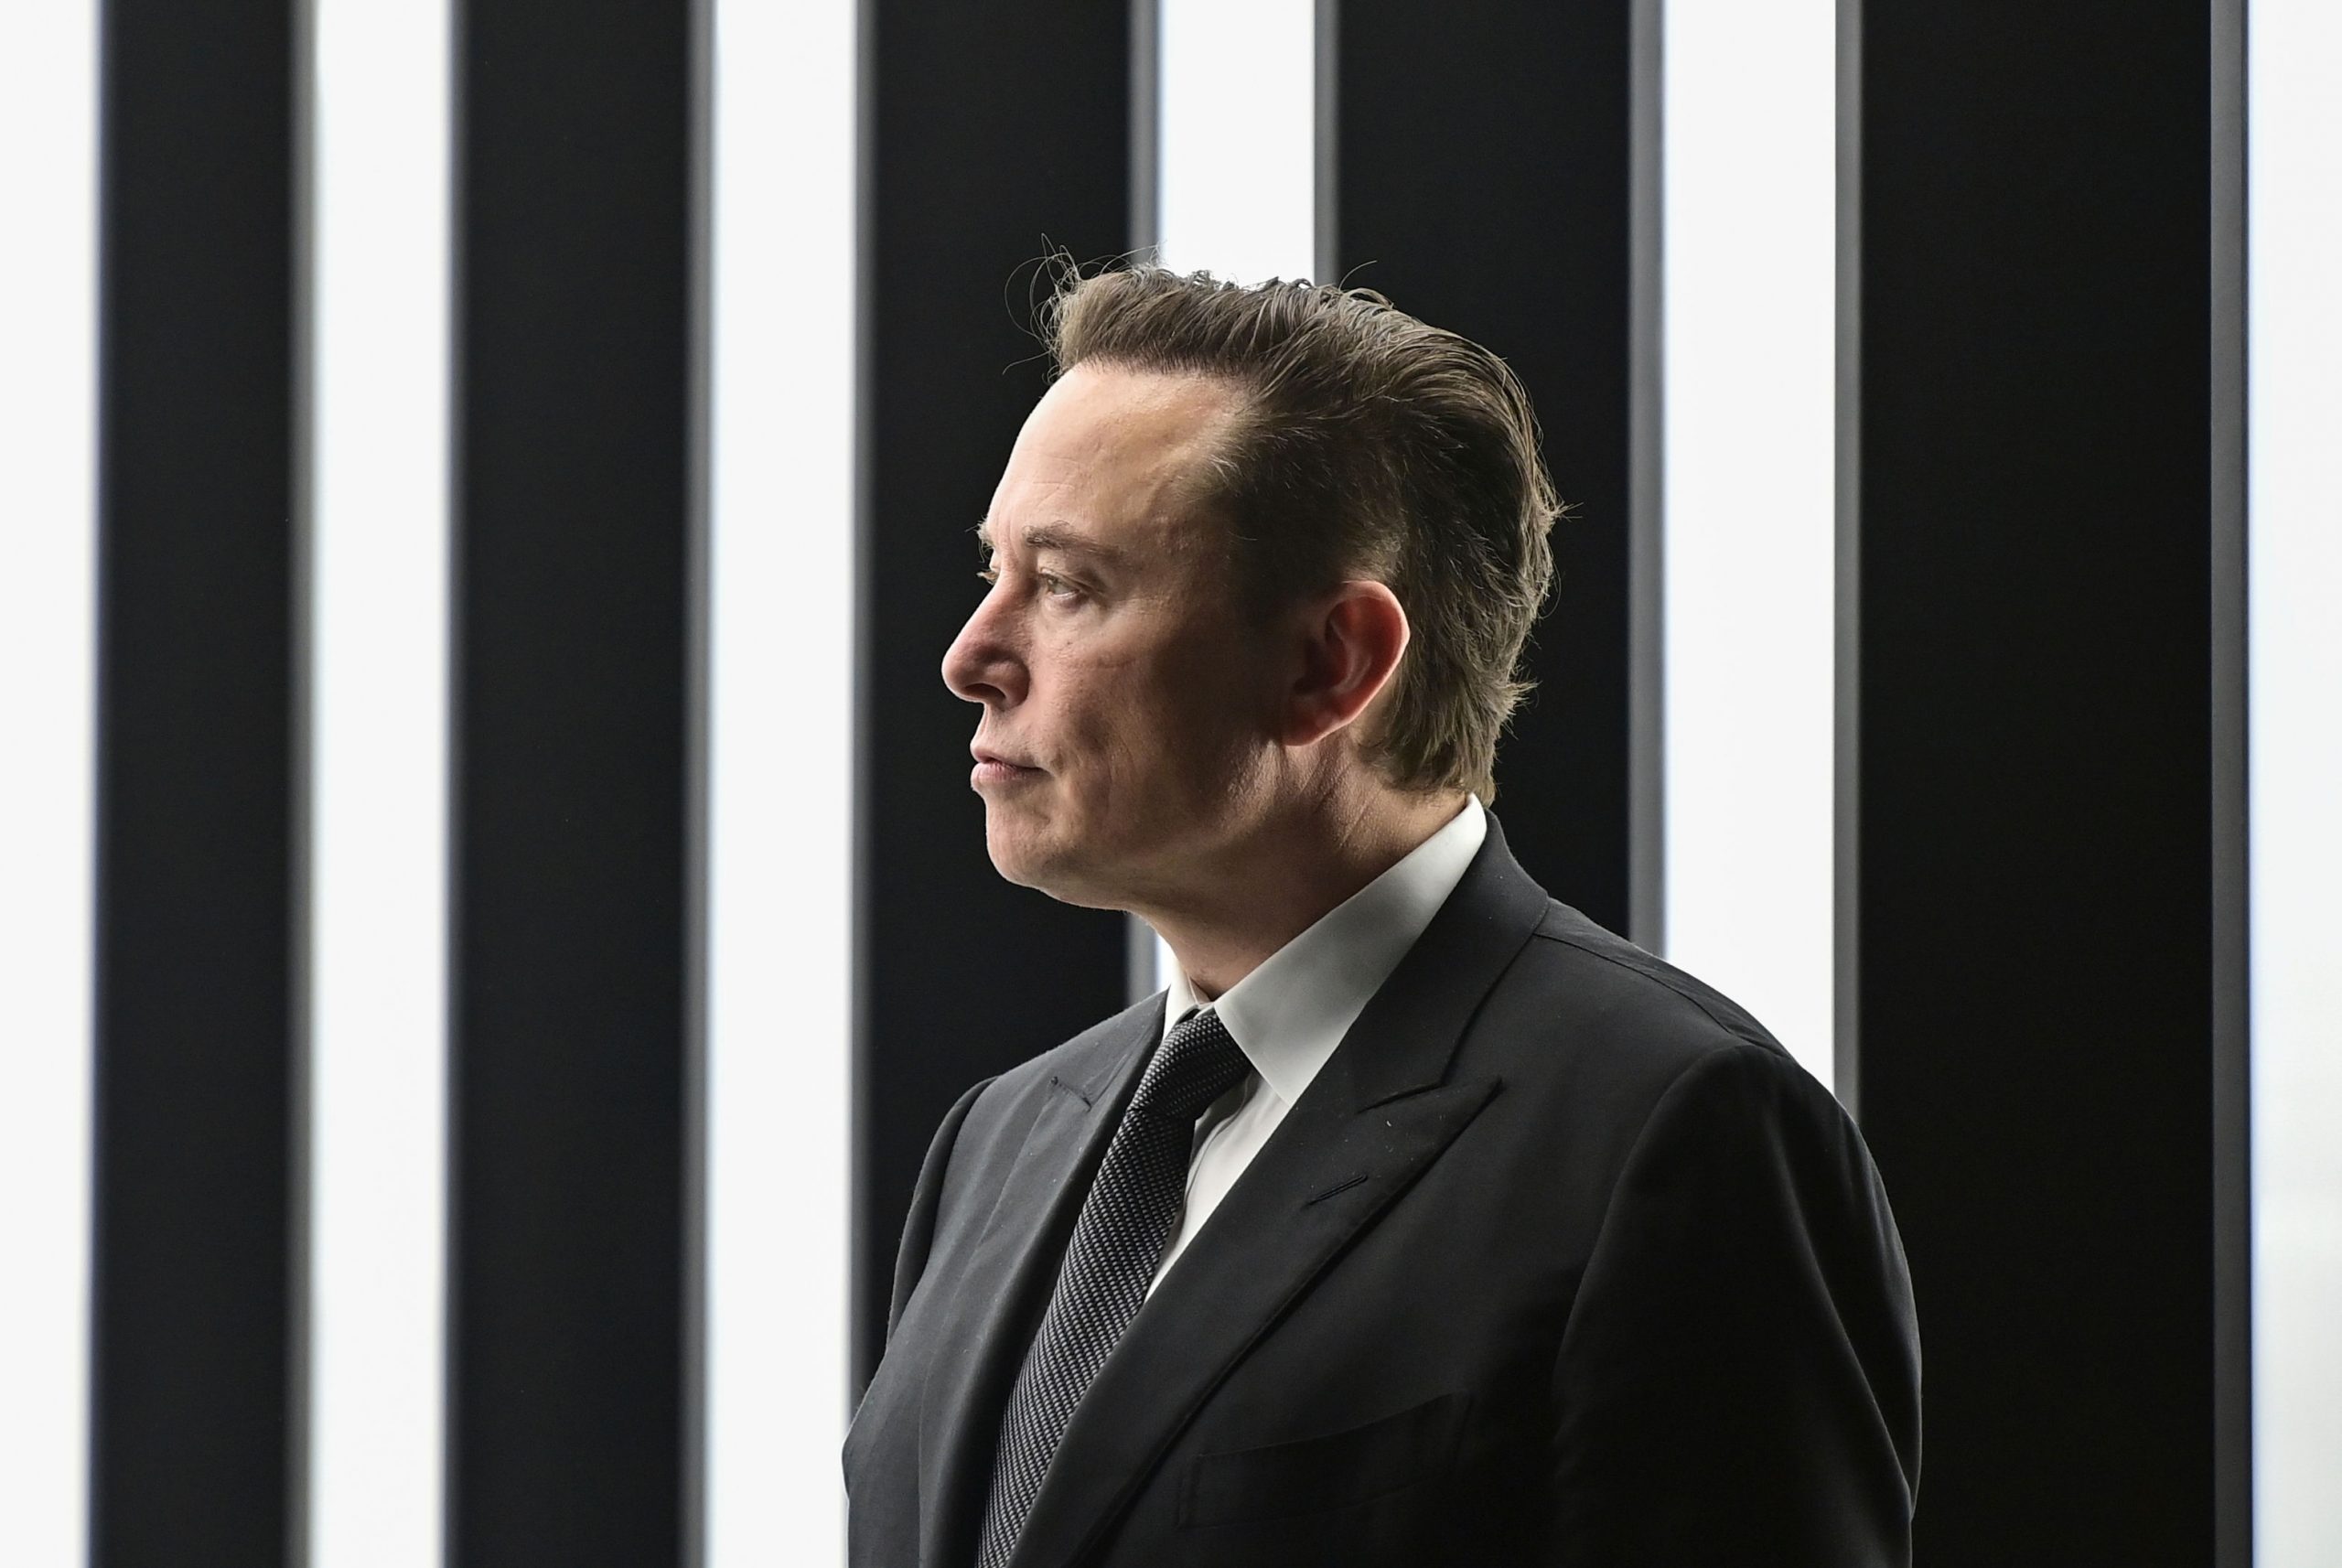 Elon Musk’s Twitter takeover means early Christmas for Morgan Stanley